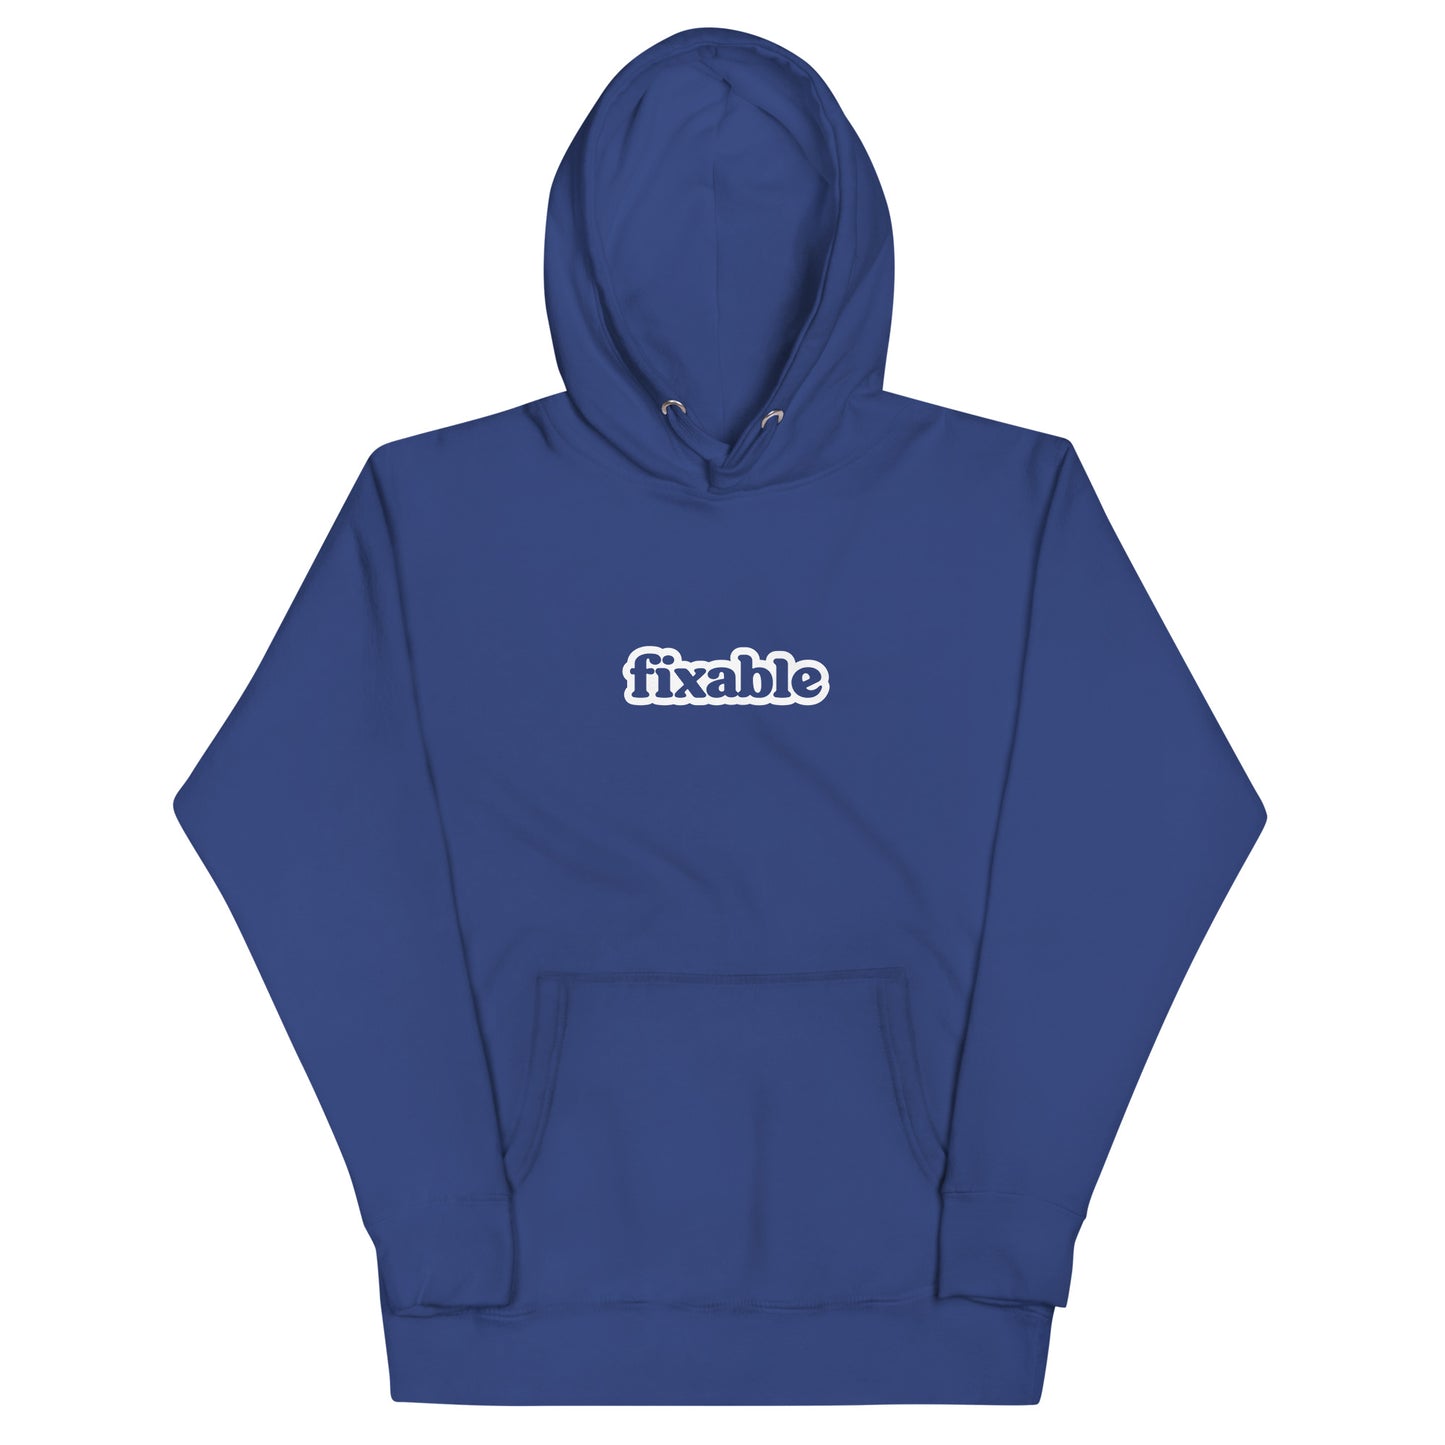 Fixable Premium "Pay Me" Hoodie